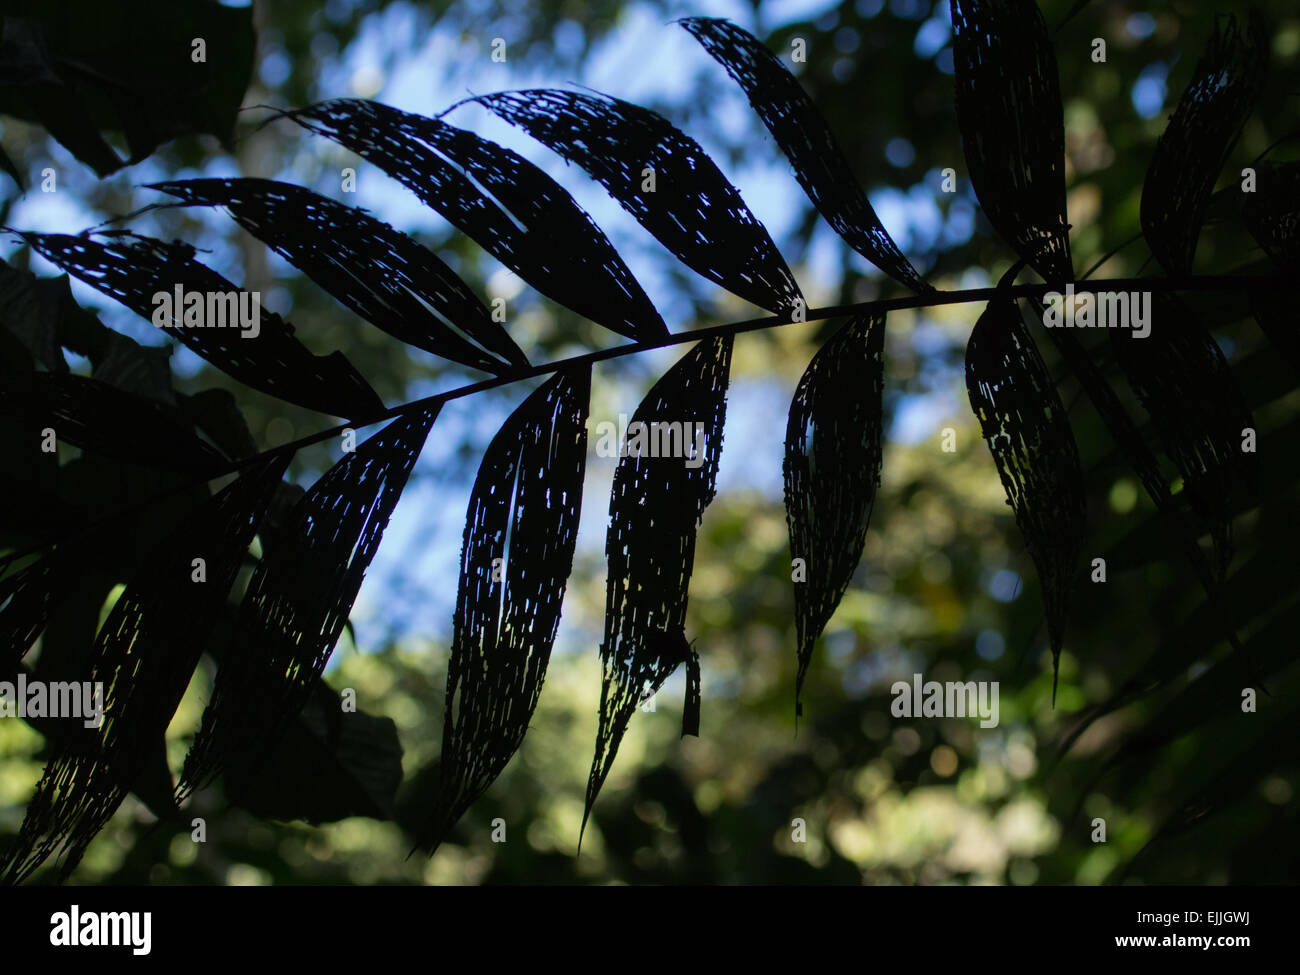 Patterns in leaves caused by insect damage, Costa Rica Stock Photo